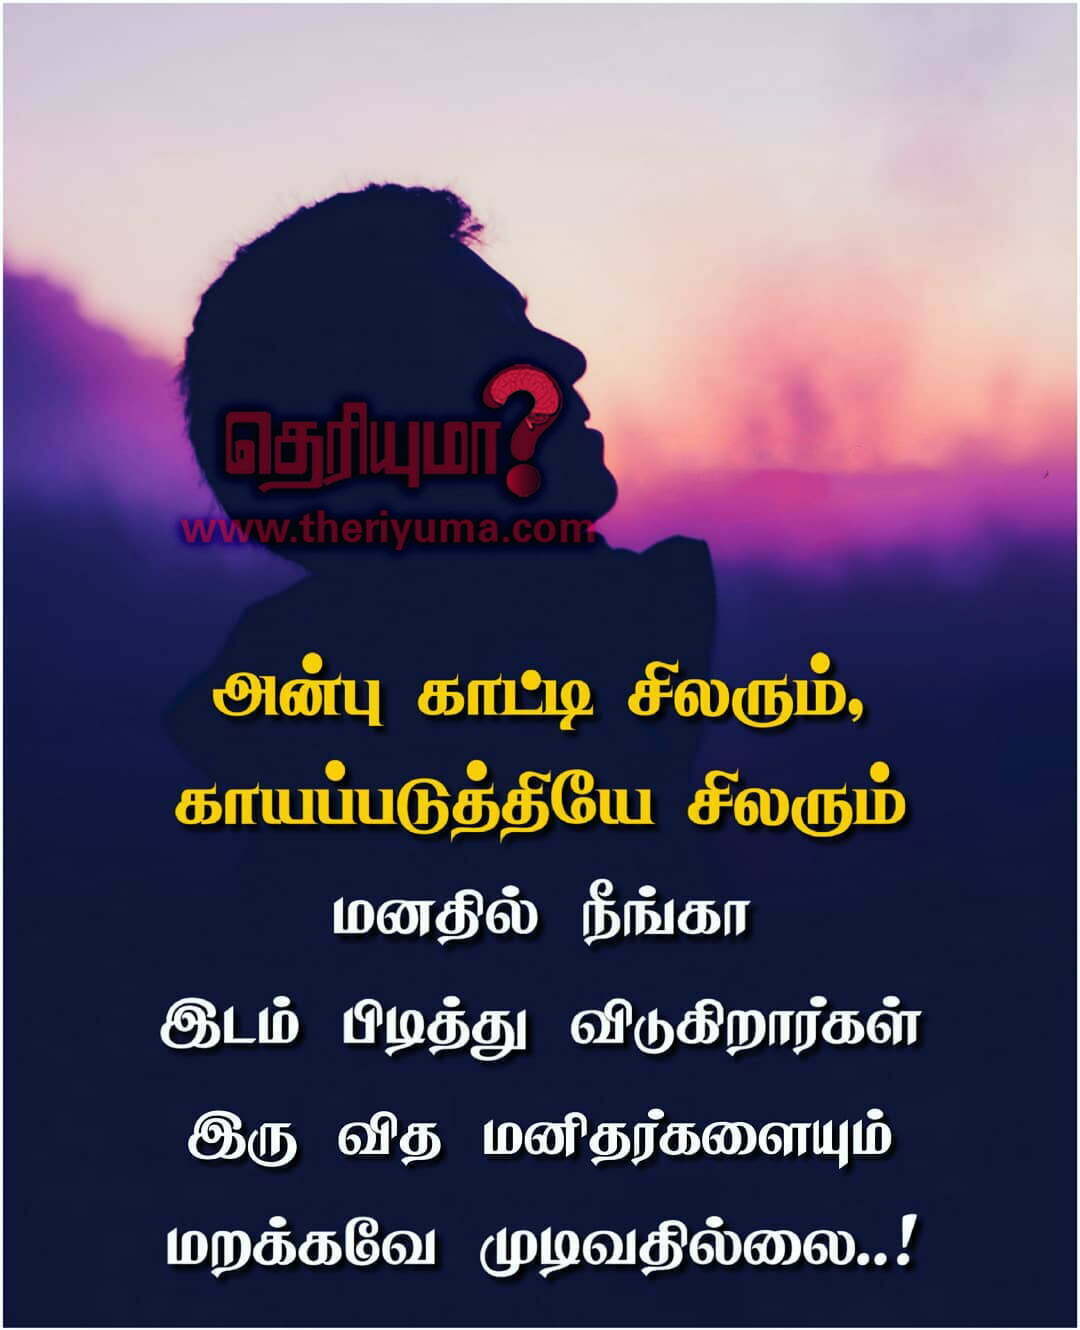 Self motivation quotes in Tamil - Motivation quotes in tamil